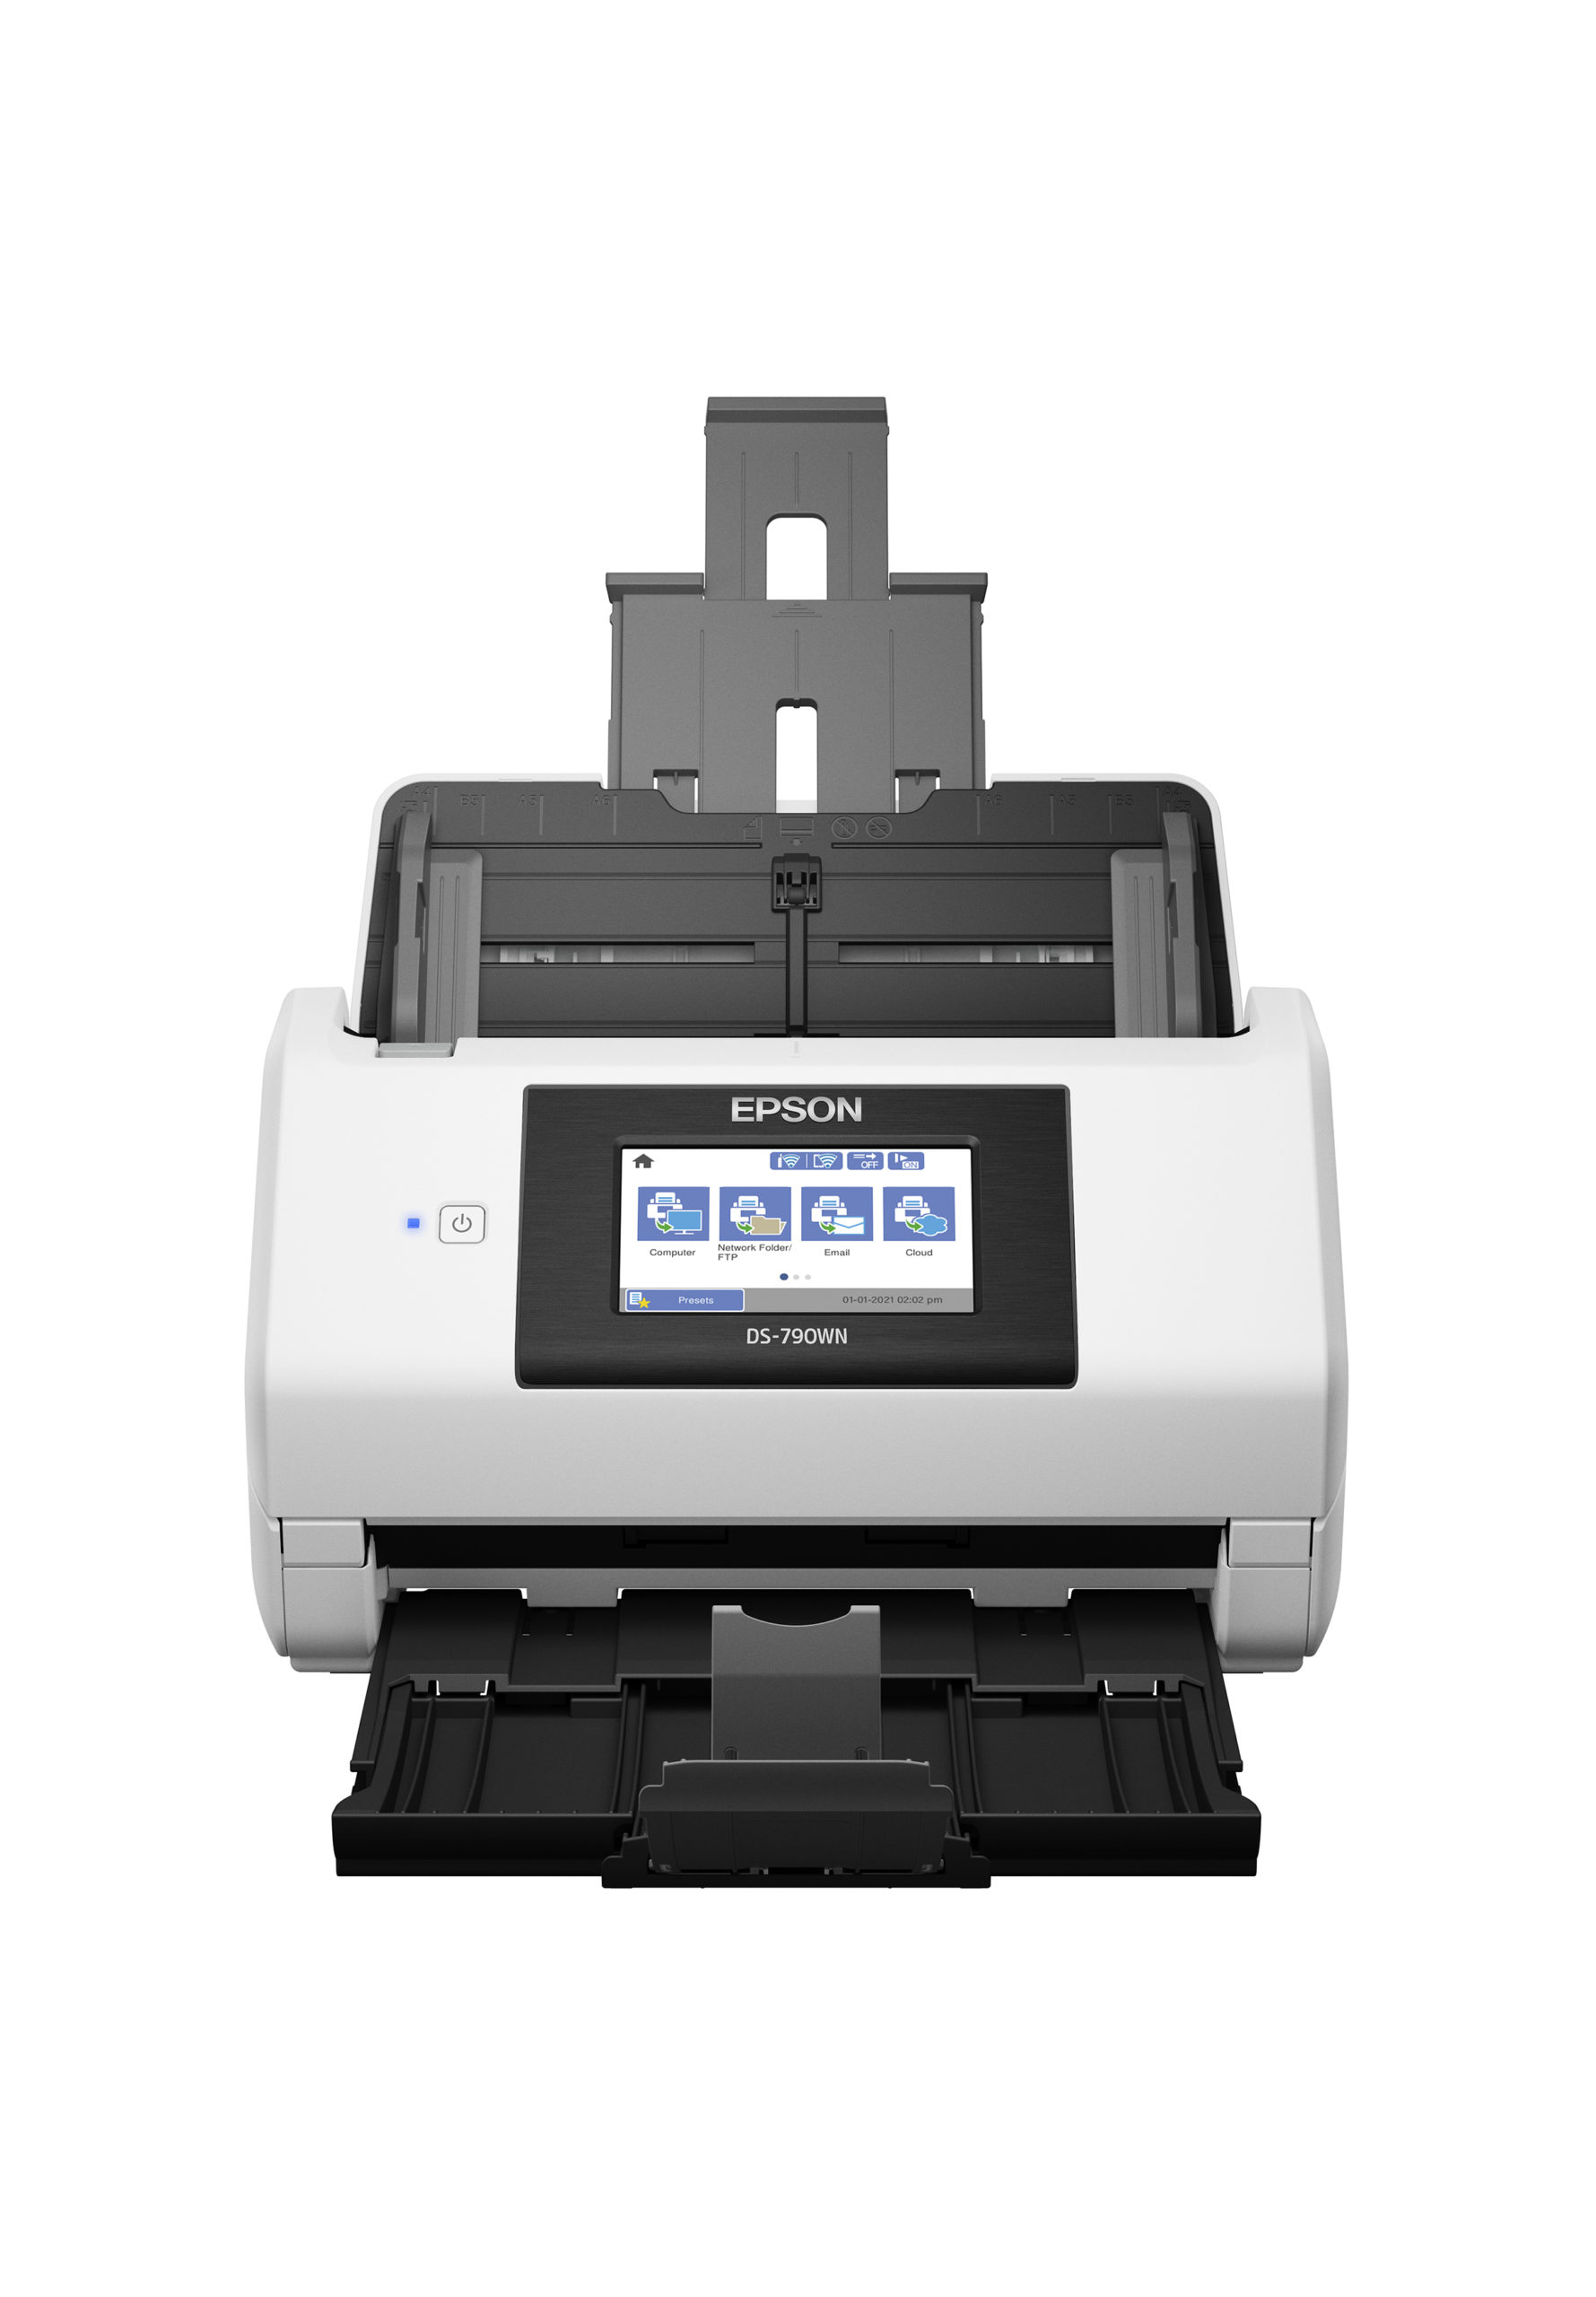 NEW Epson DS-790WN Wireless Network Color Document Scanner -PC-free  scanning for easy sharing and collaboration